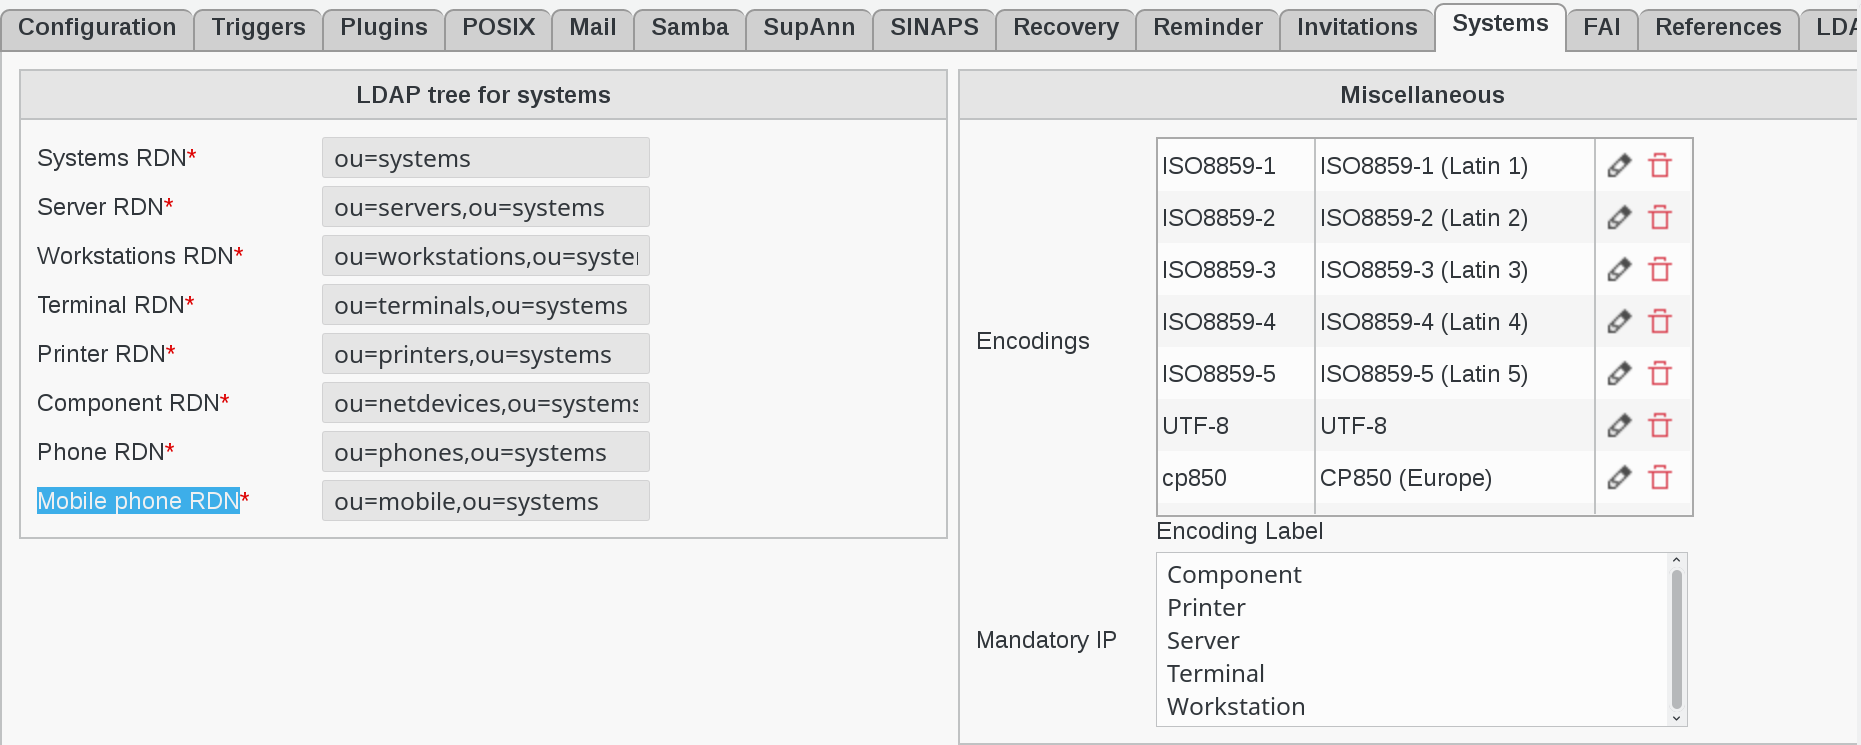 Picture of Systems configuration page in FusionDirectory